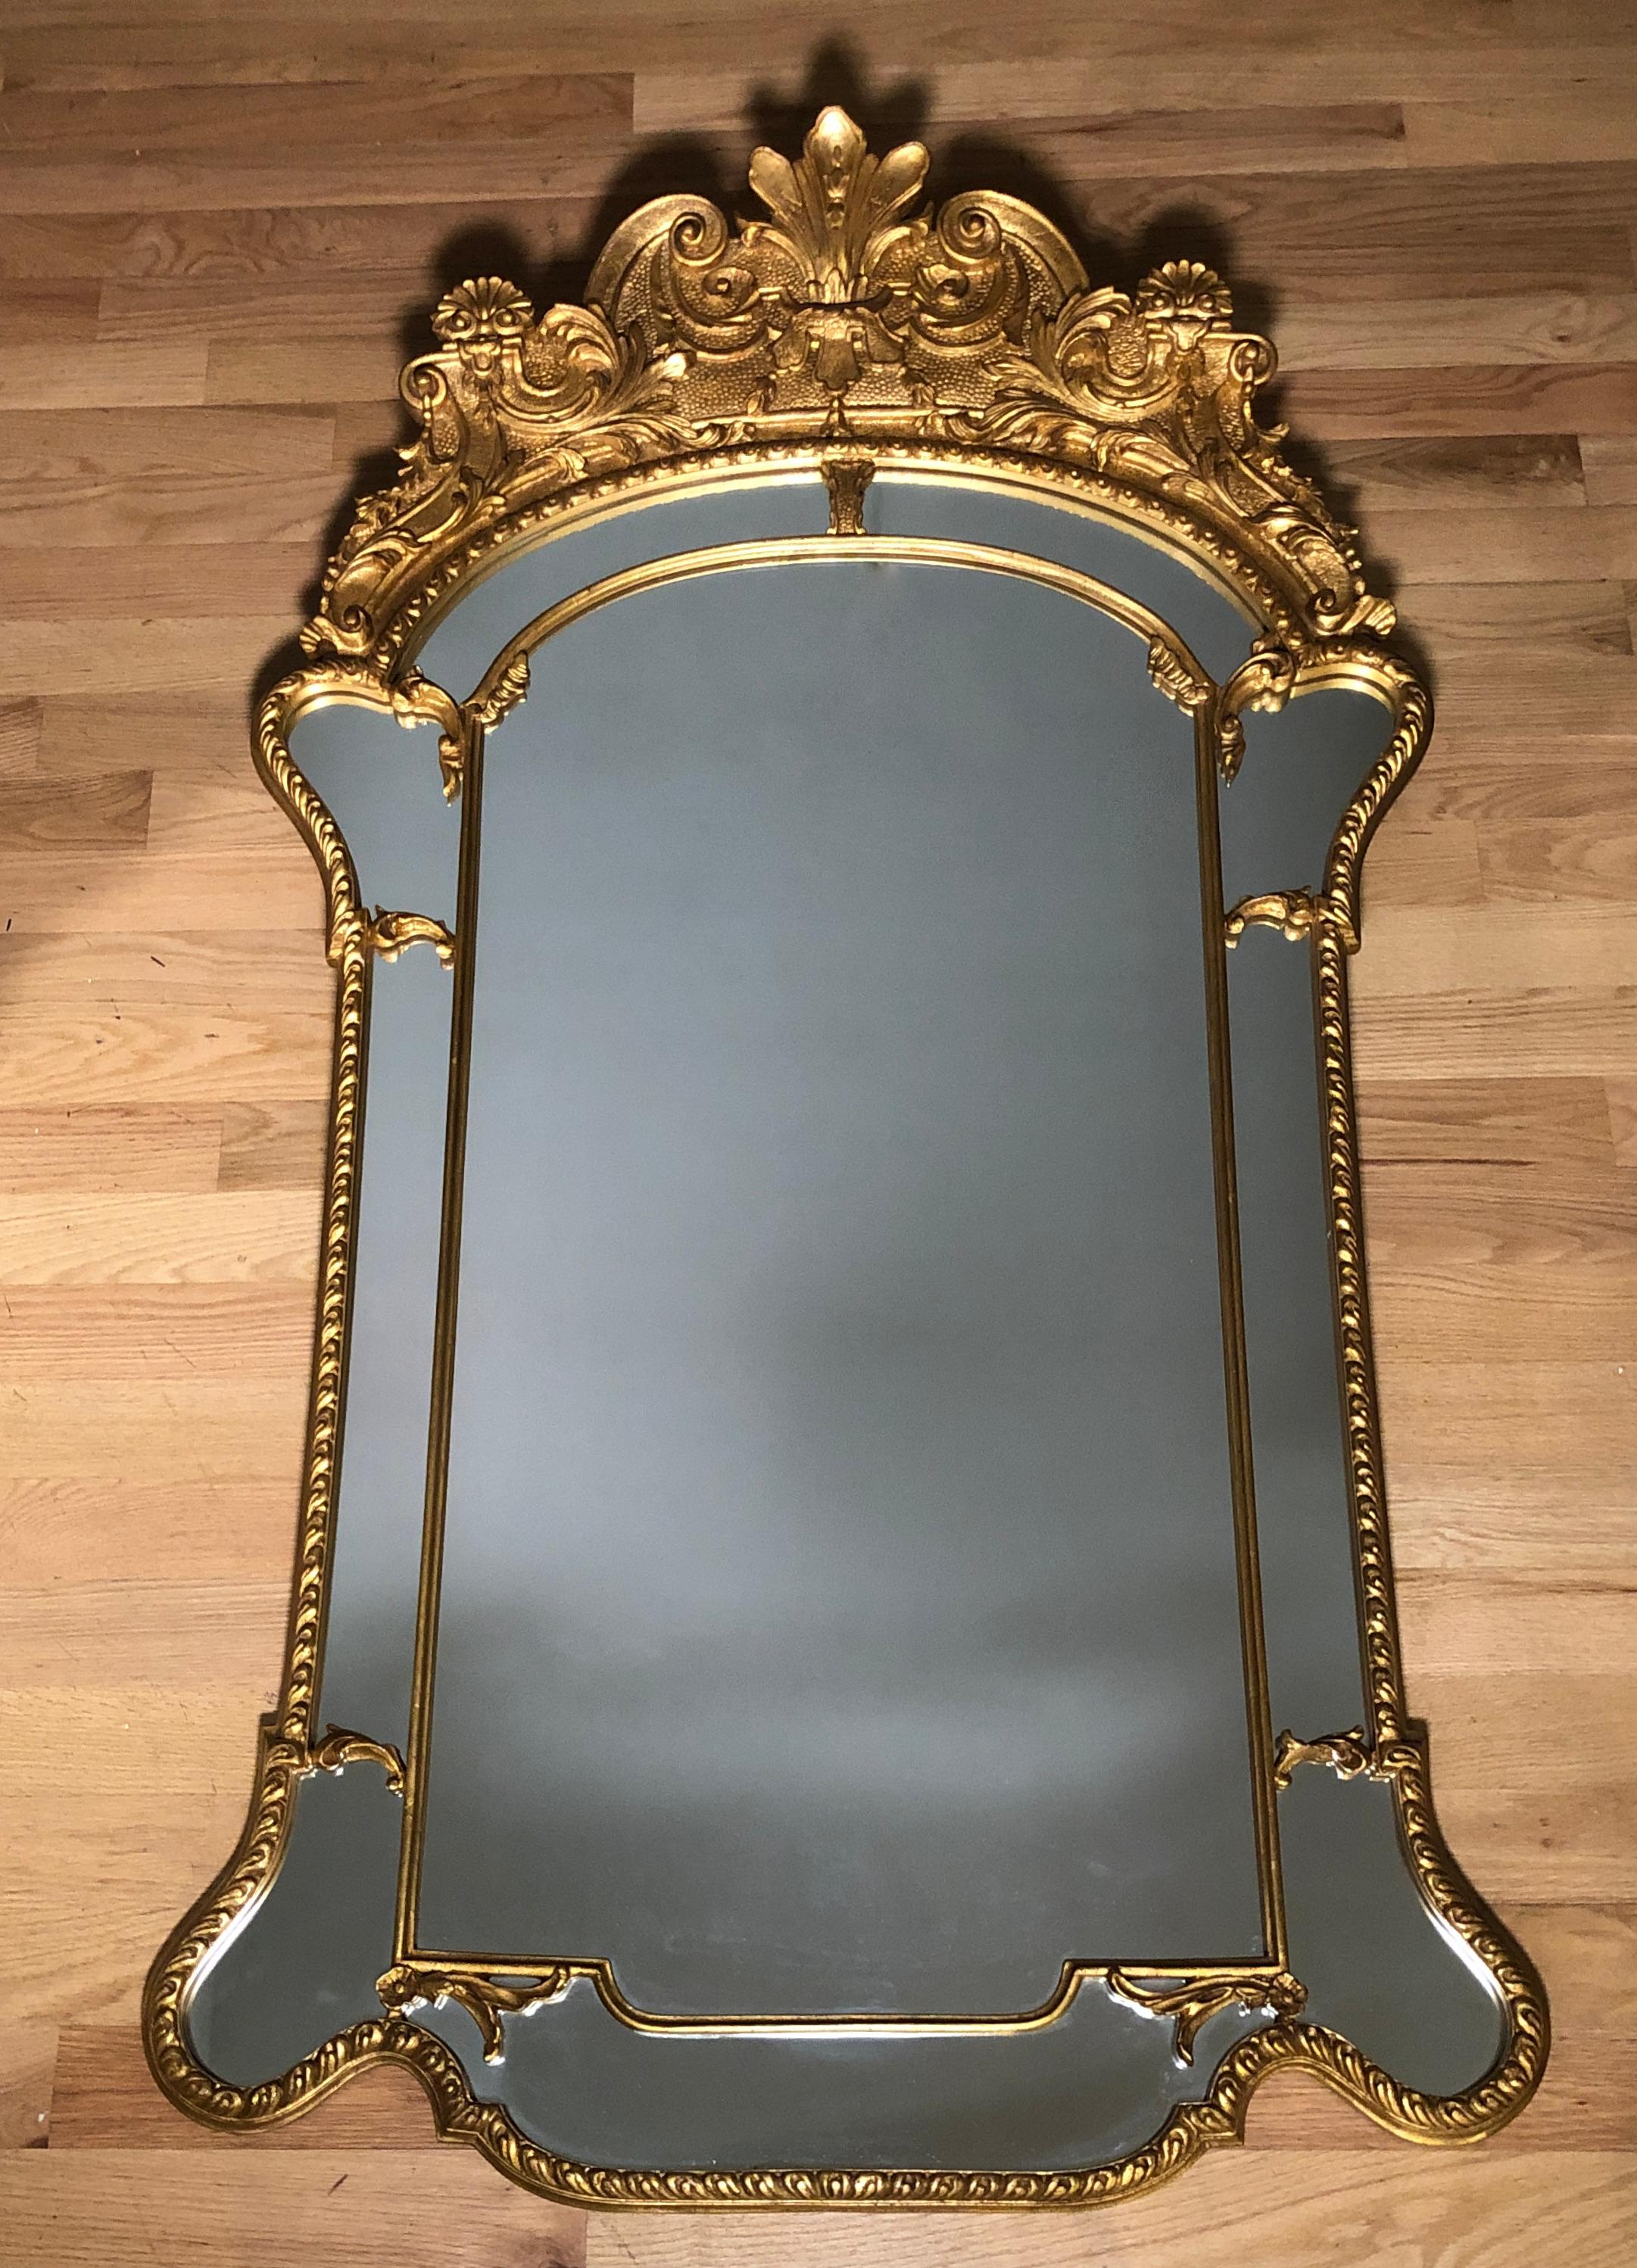 Fine quality large carved and gilt Regency mirror. Beautiful gilding with a Versailles form interior frame.